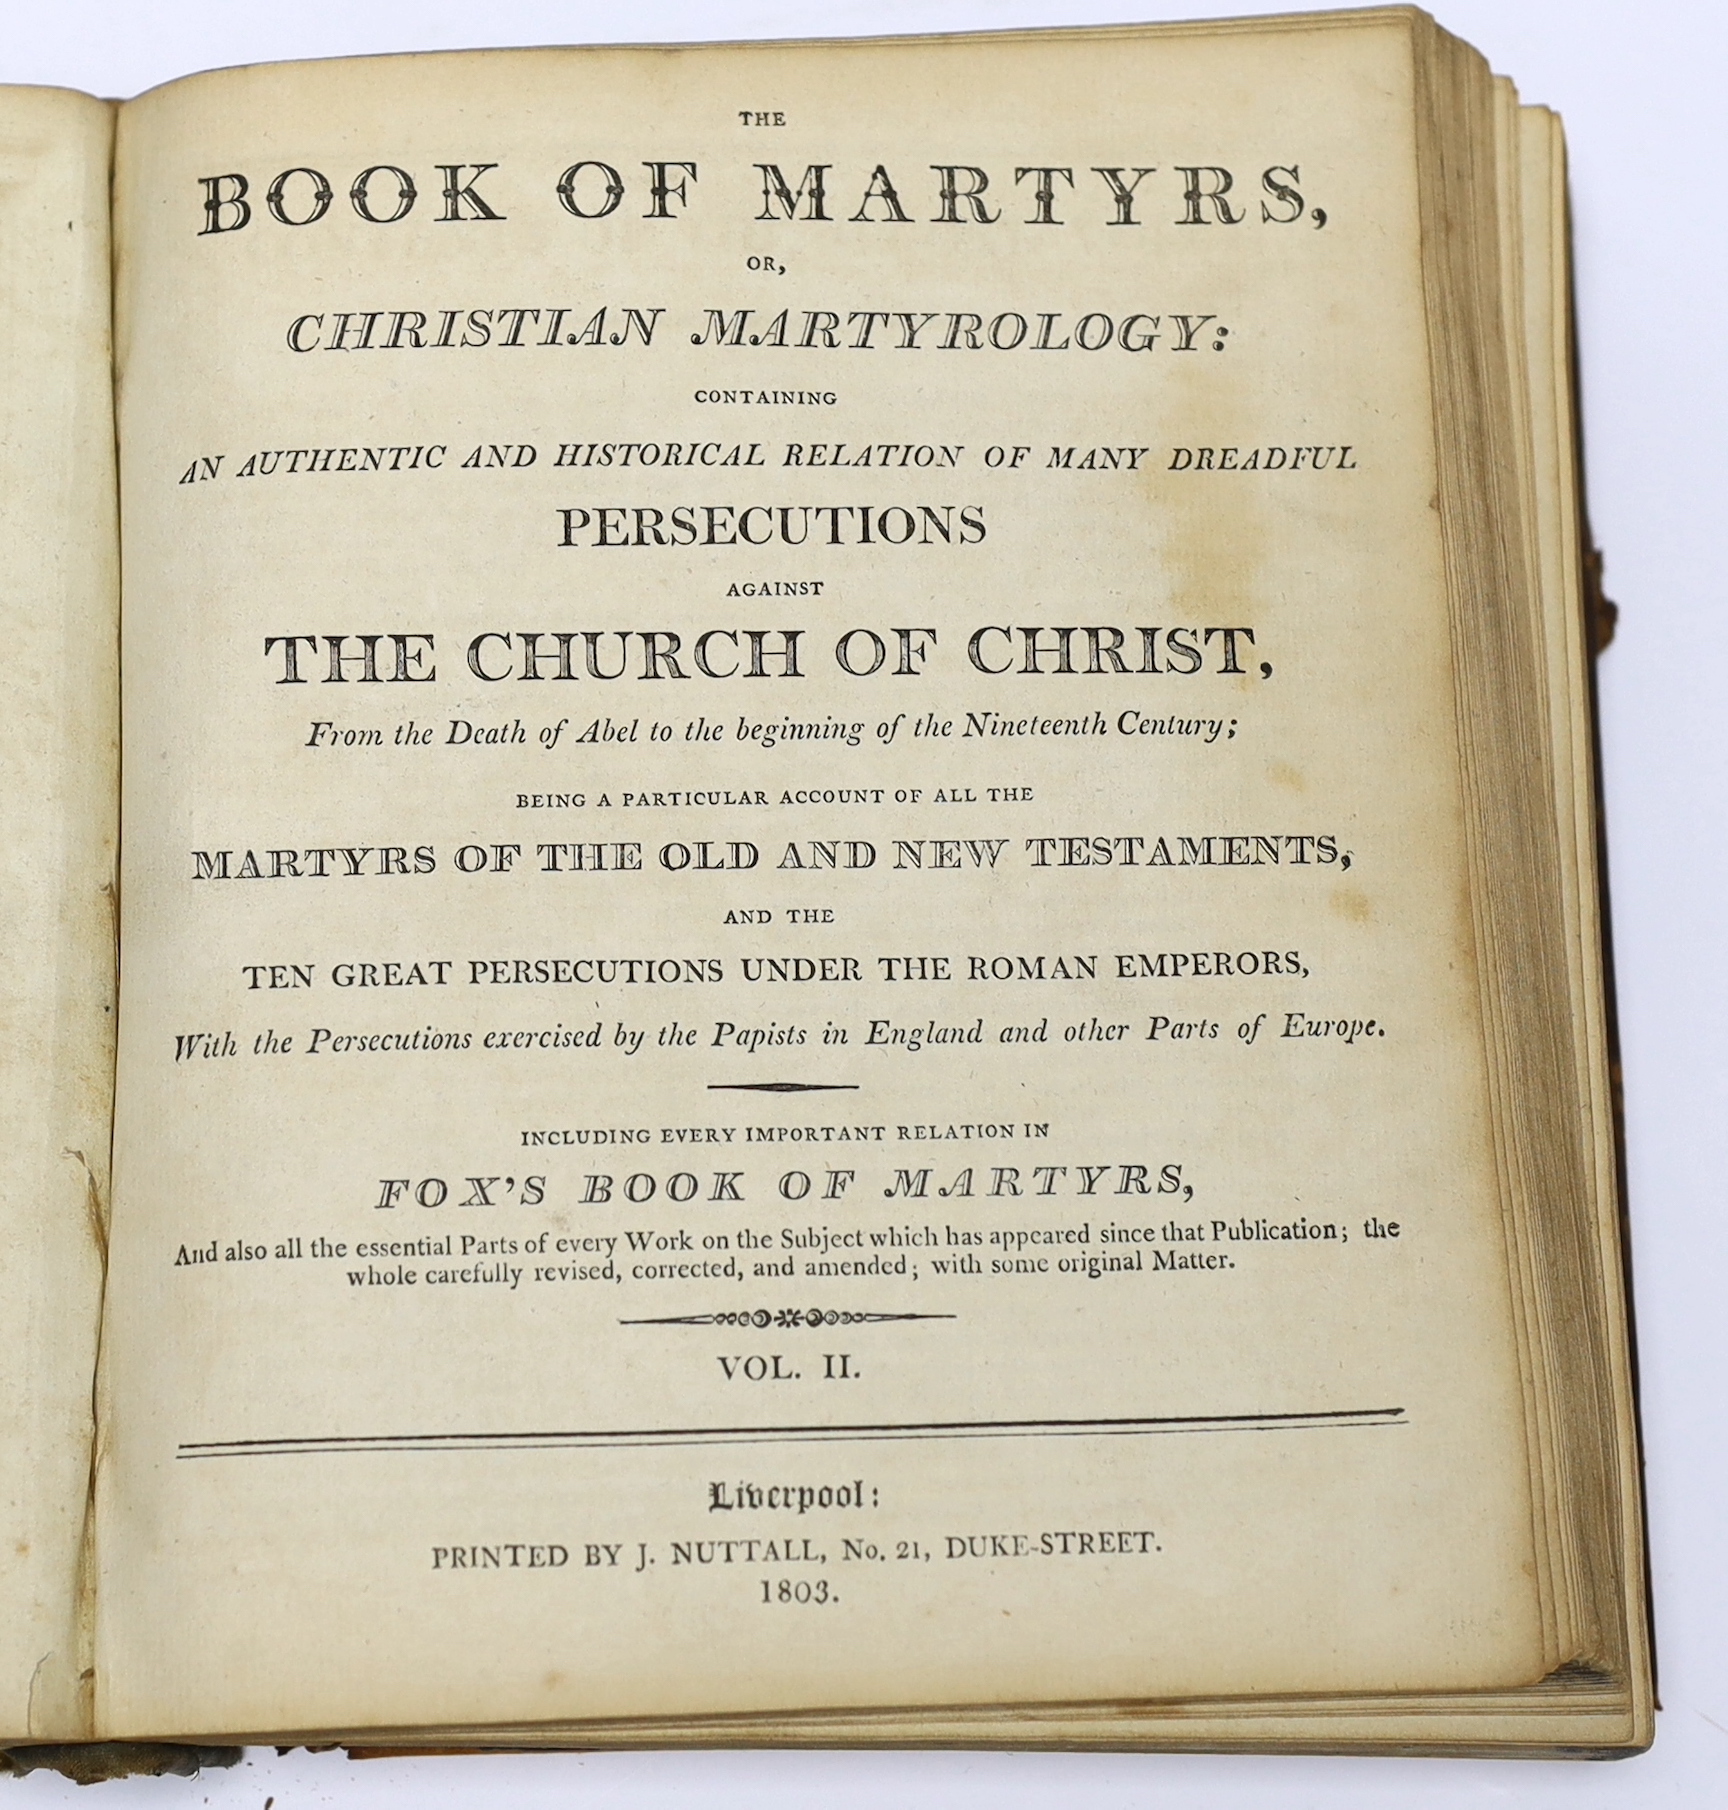 ° ° The Book of Martyrs, or Christian Martyrology....including every important relation in Fox's - Image 4 of 5